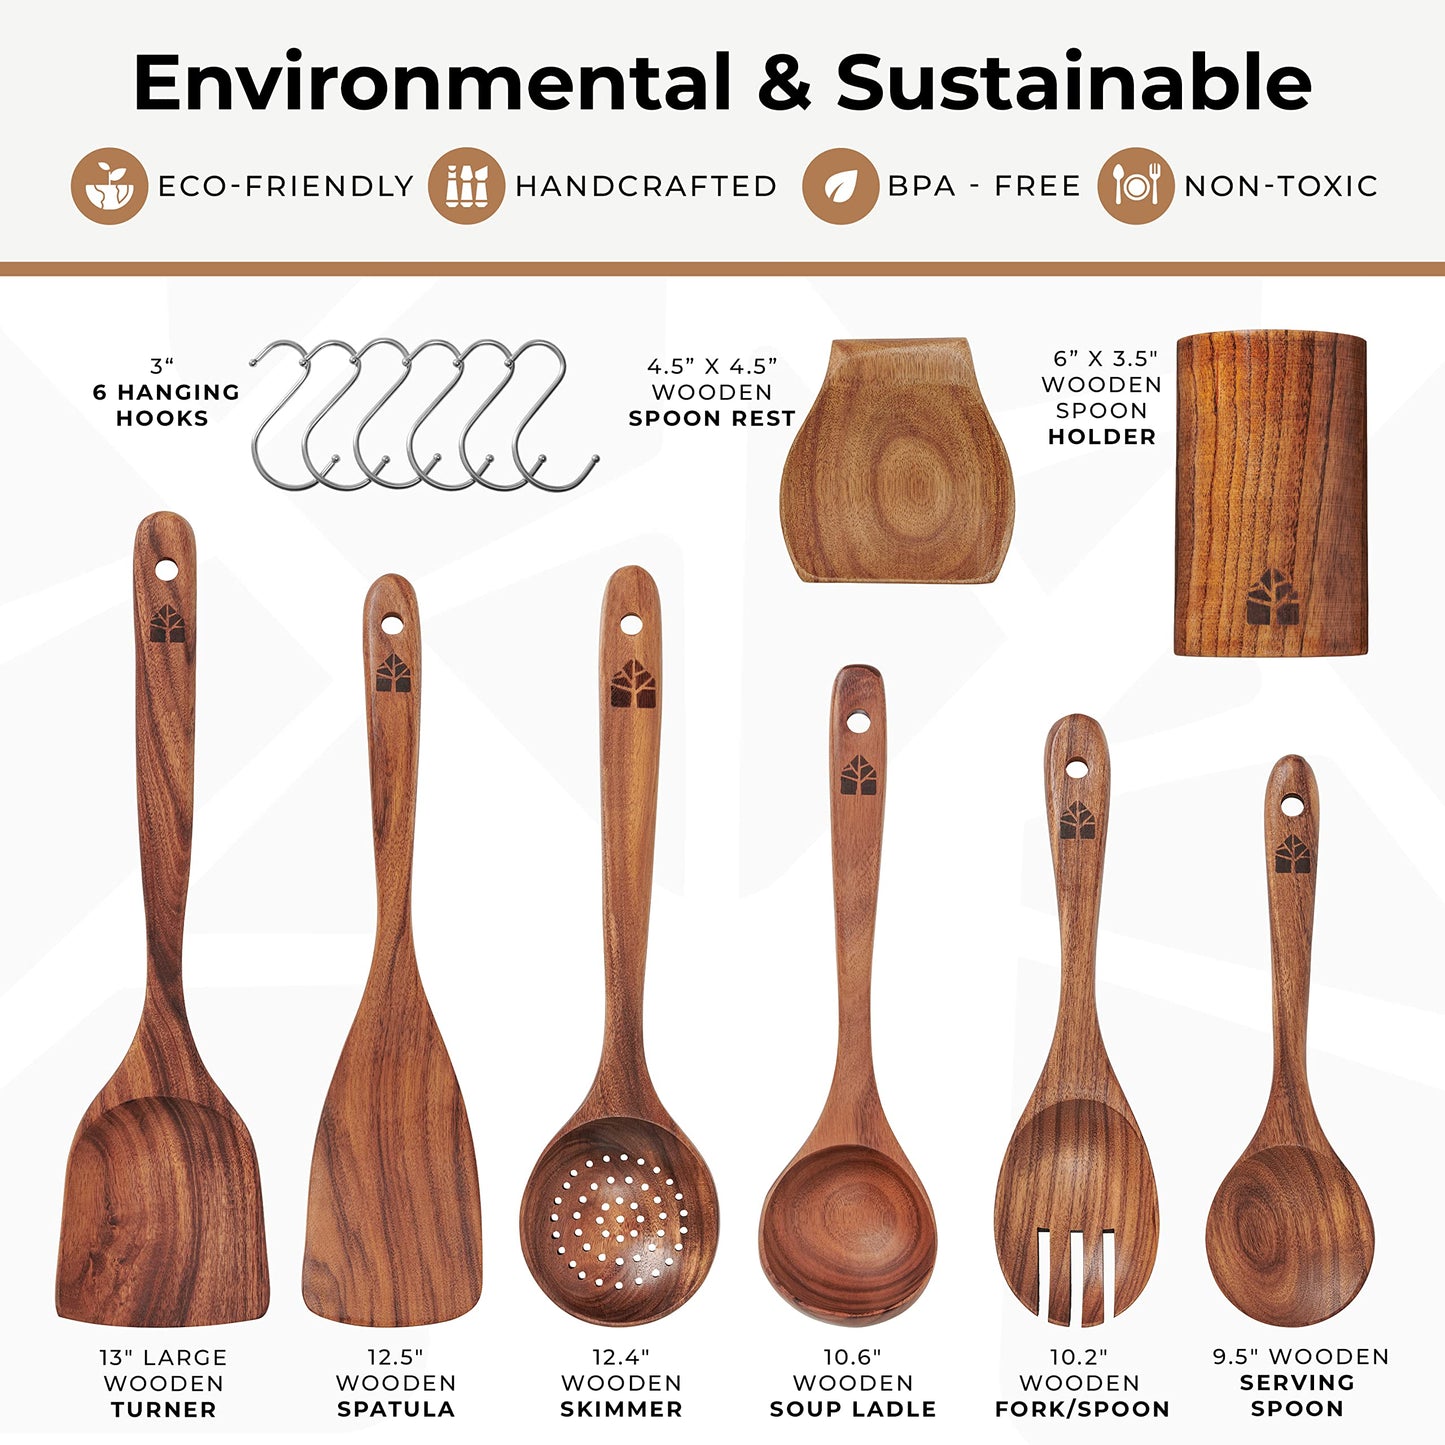 Wooden Spoons for Cooking – Wooden Utensils for Cooking Set with Holder, Spoon Rest & Hooks, Teak Wood Nonstick Kitchen Cookware – Durable Set of 8pcs by Woodenhouse